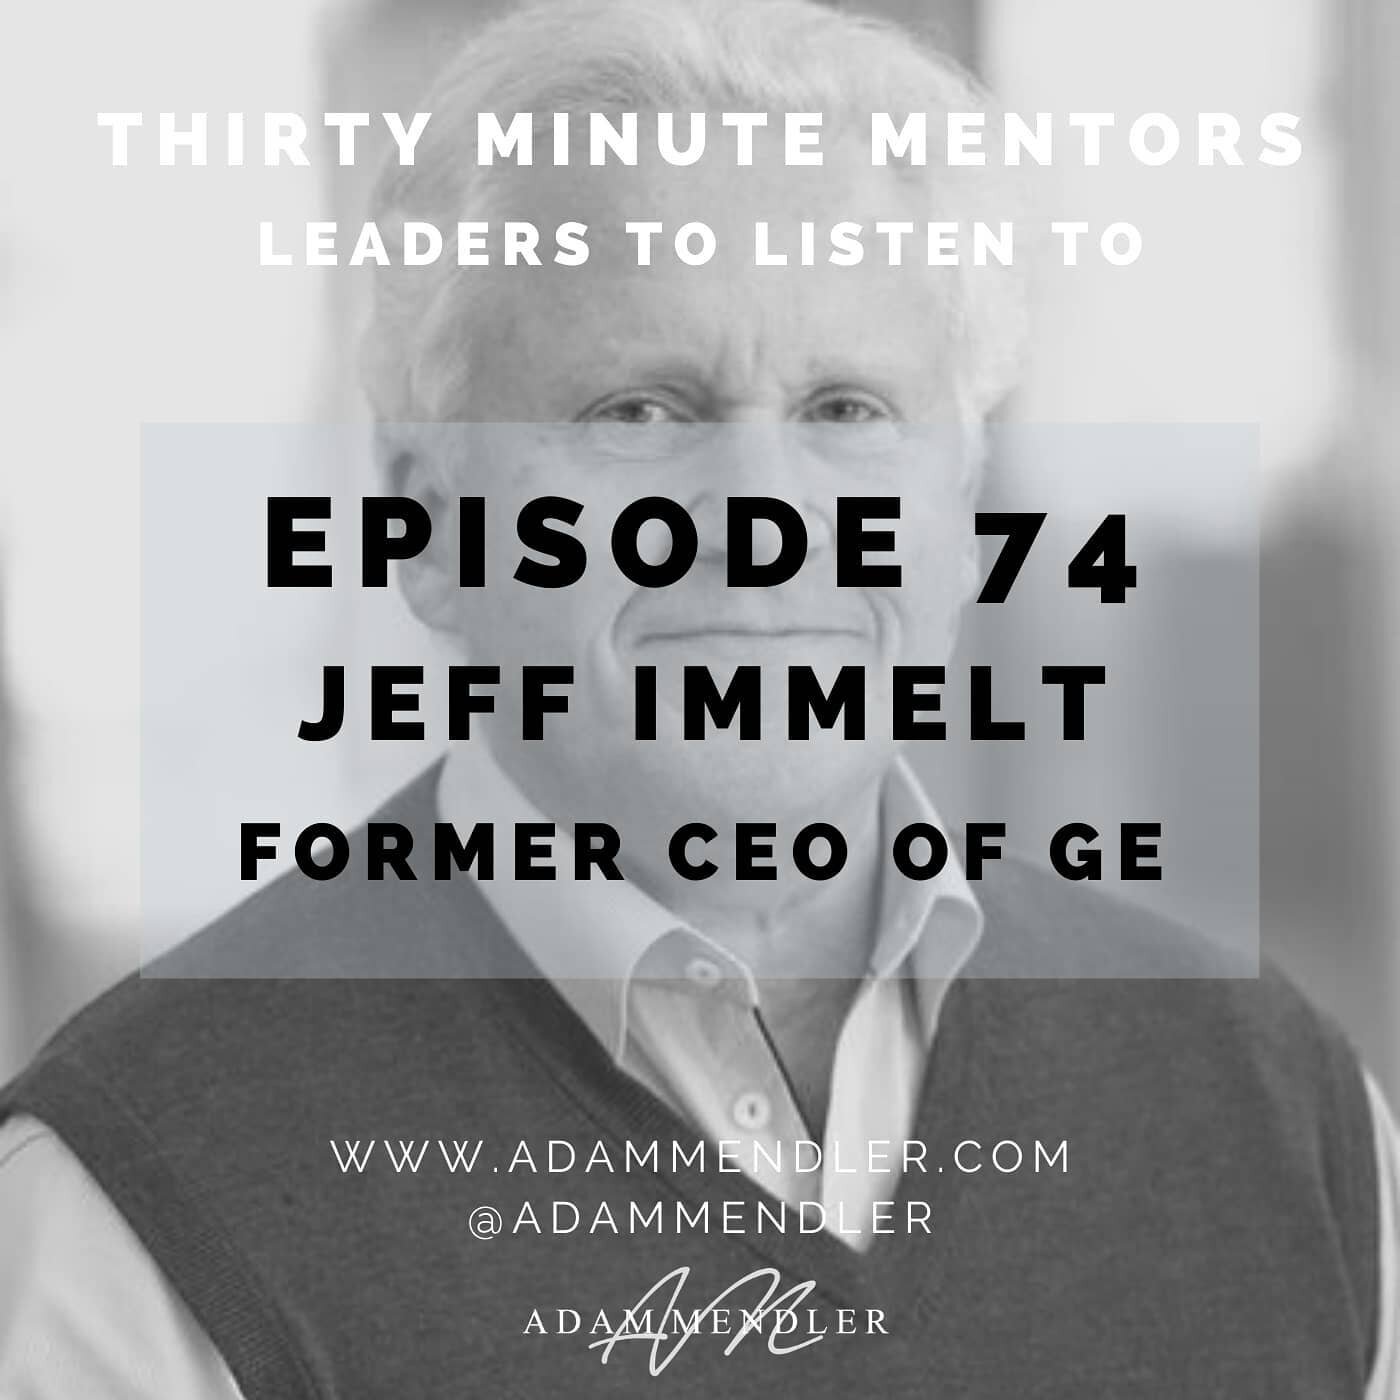 Jeff Immelt spent 17 years as the CEO of GE, then one of the five largest companies in the country, with annual revenues that exceeded $180 billion. Jeff joined me on Episode 74 of Thirty Minute Mentors to share his best lessons from the highs and lo